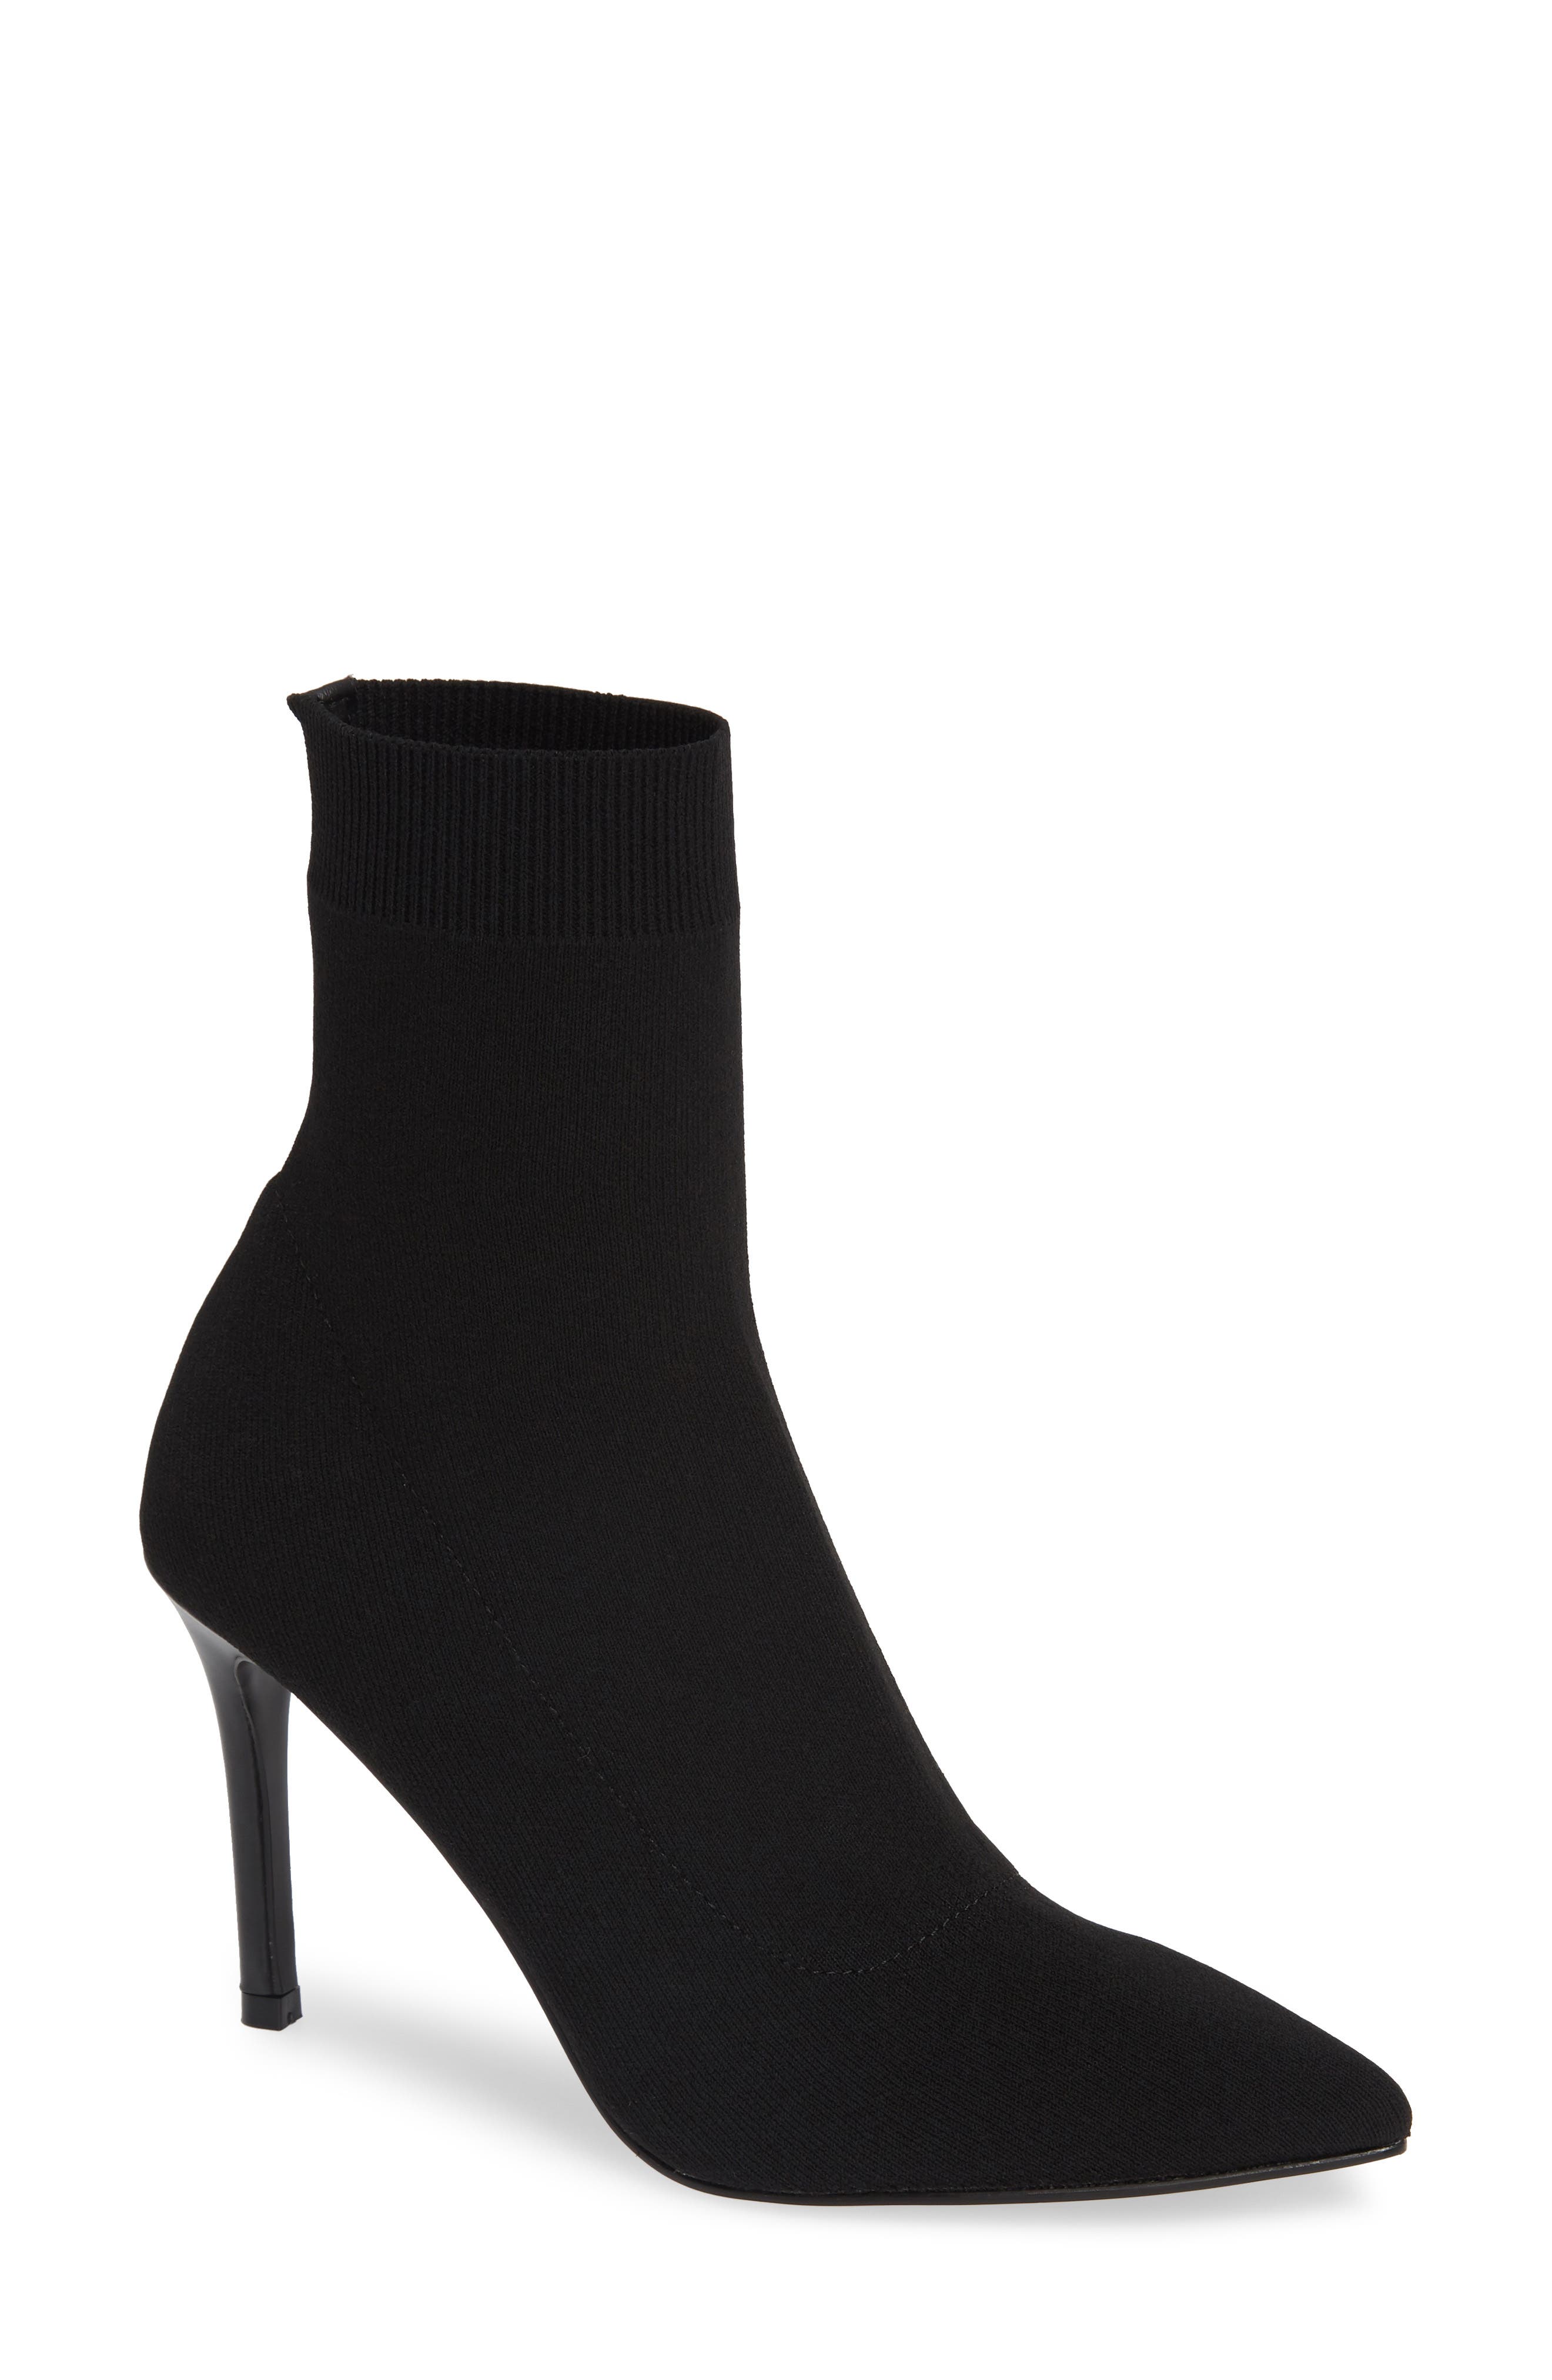 steve madden claire booties